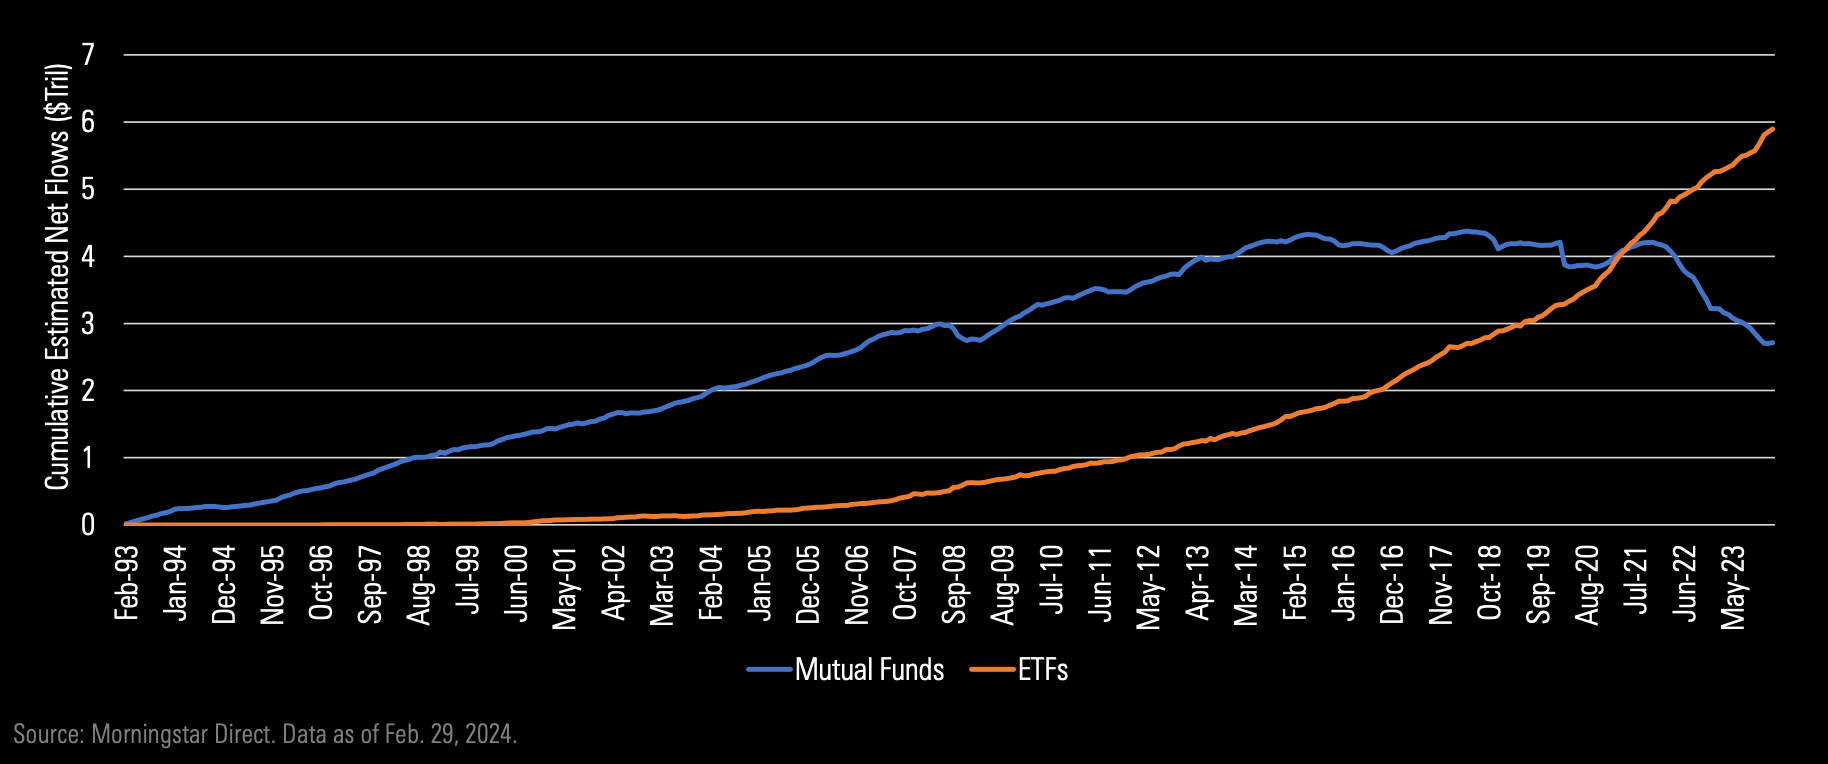 Line graph showing cumulated estimated net flow of mutual funds and ETFs from February 1993 to May 2023.